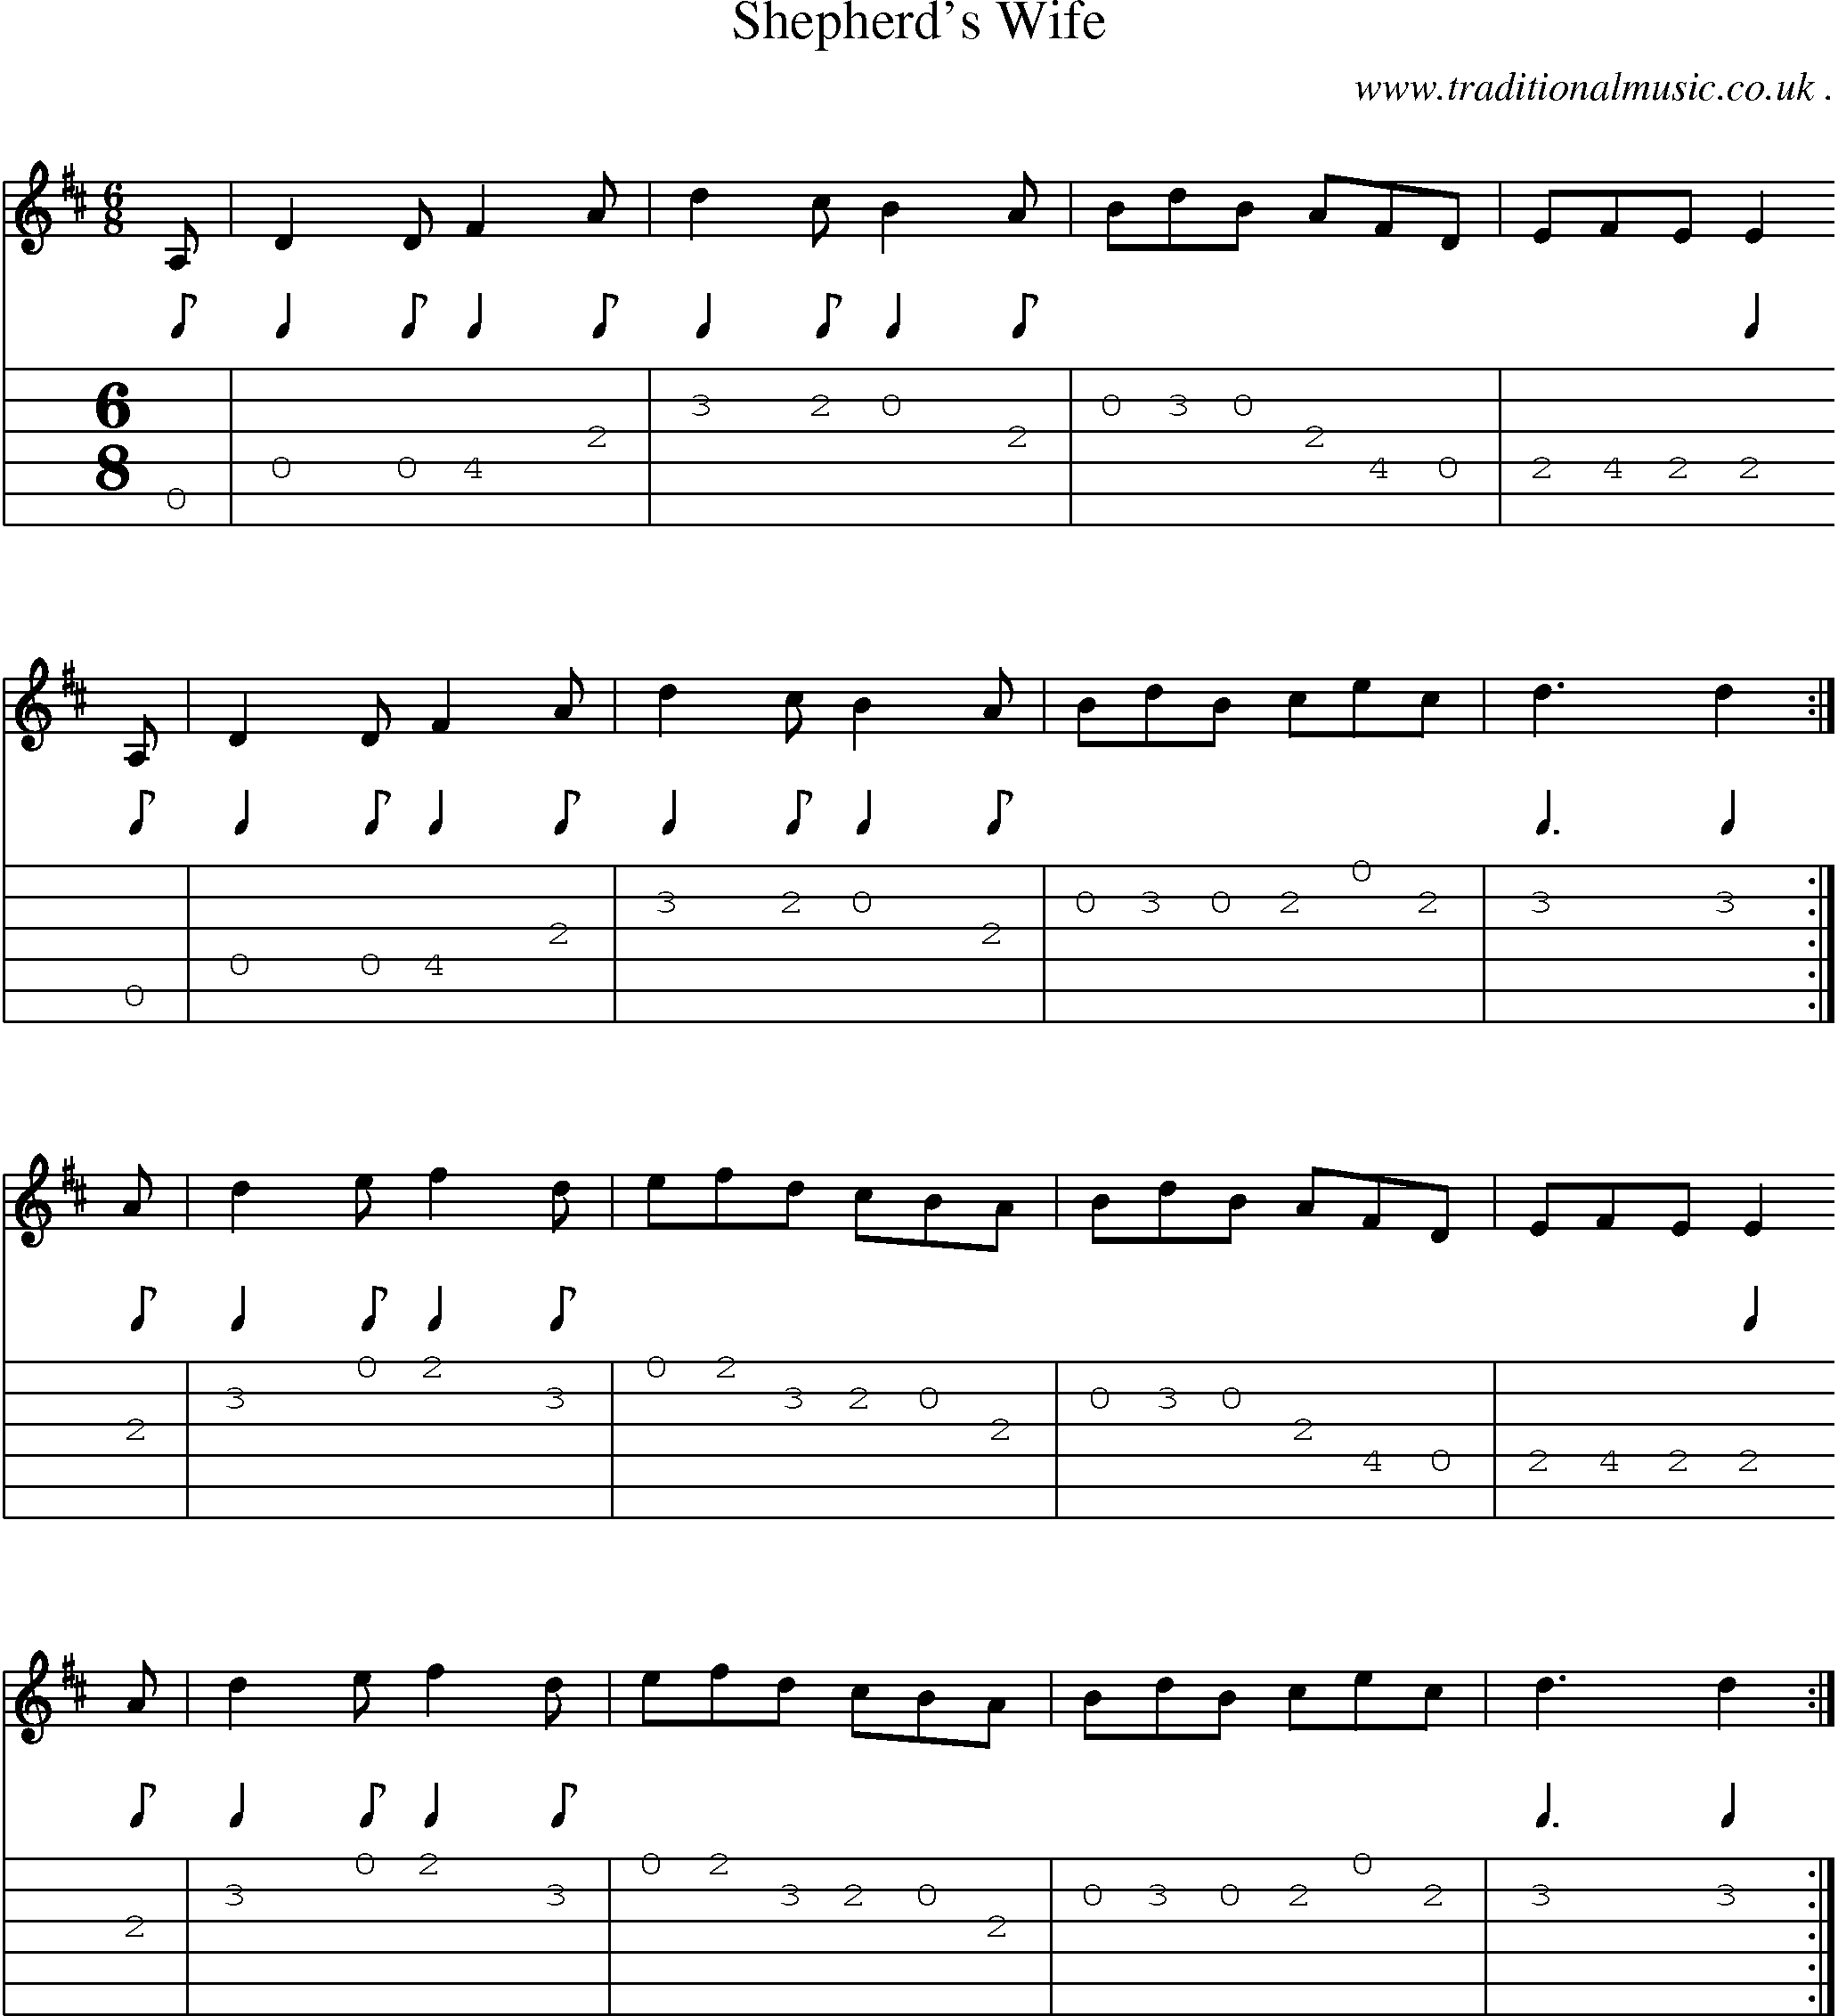 Sheet-music  score, Chords and Guitar Tabs for Shepherds Wife